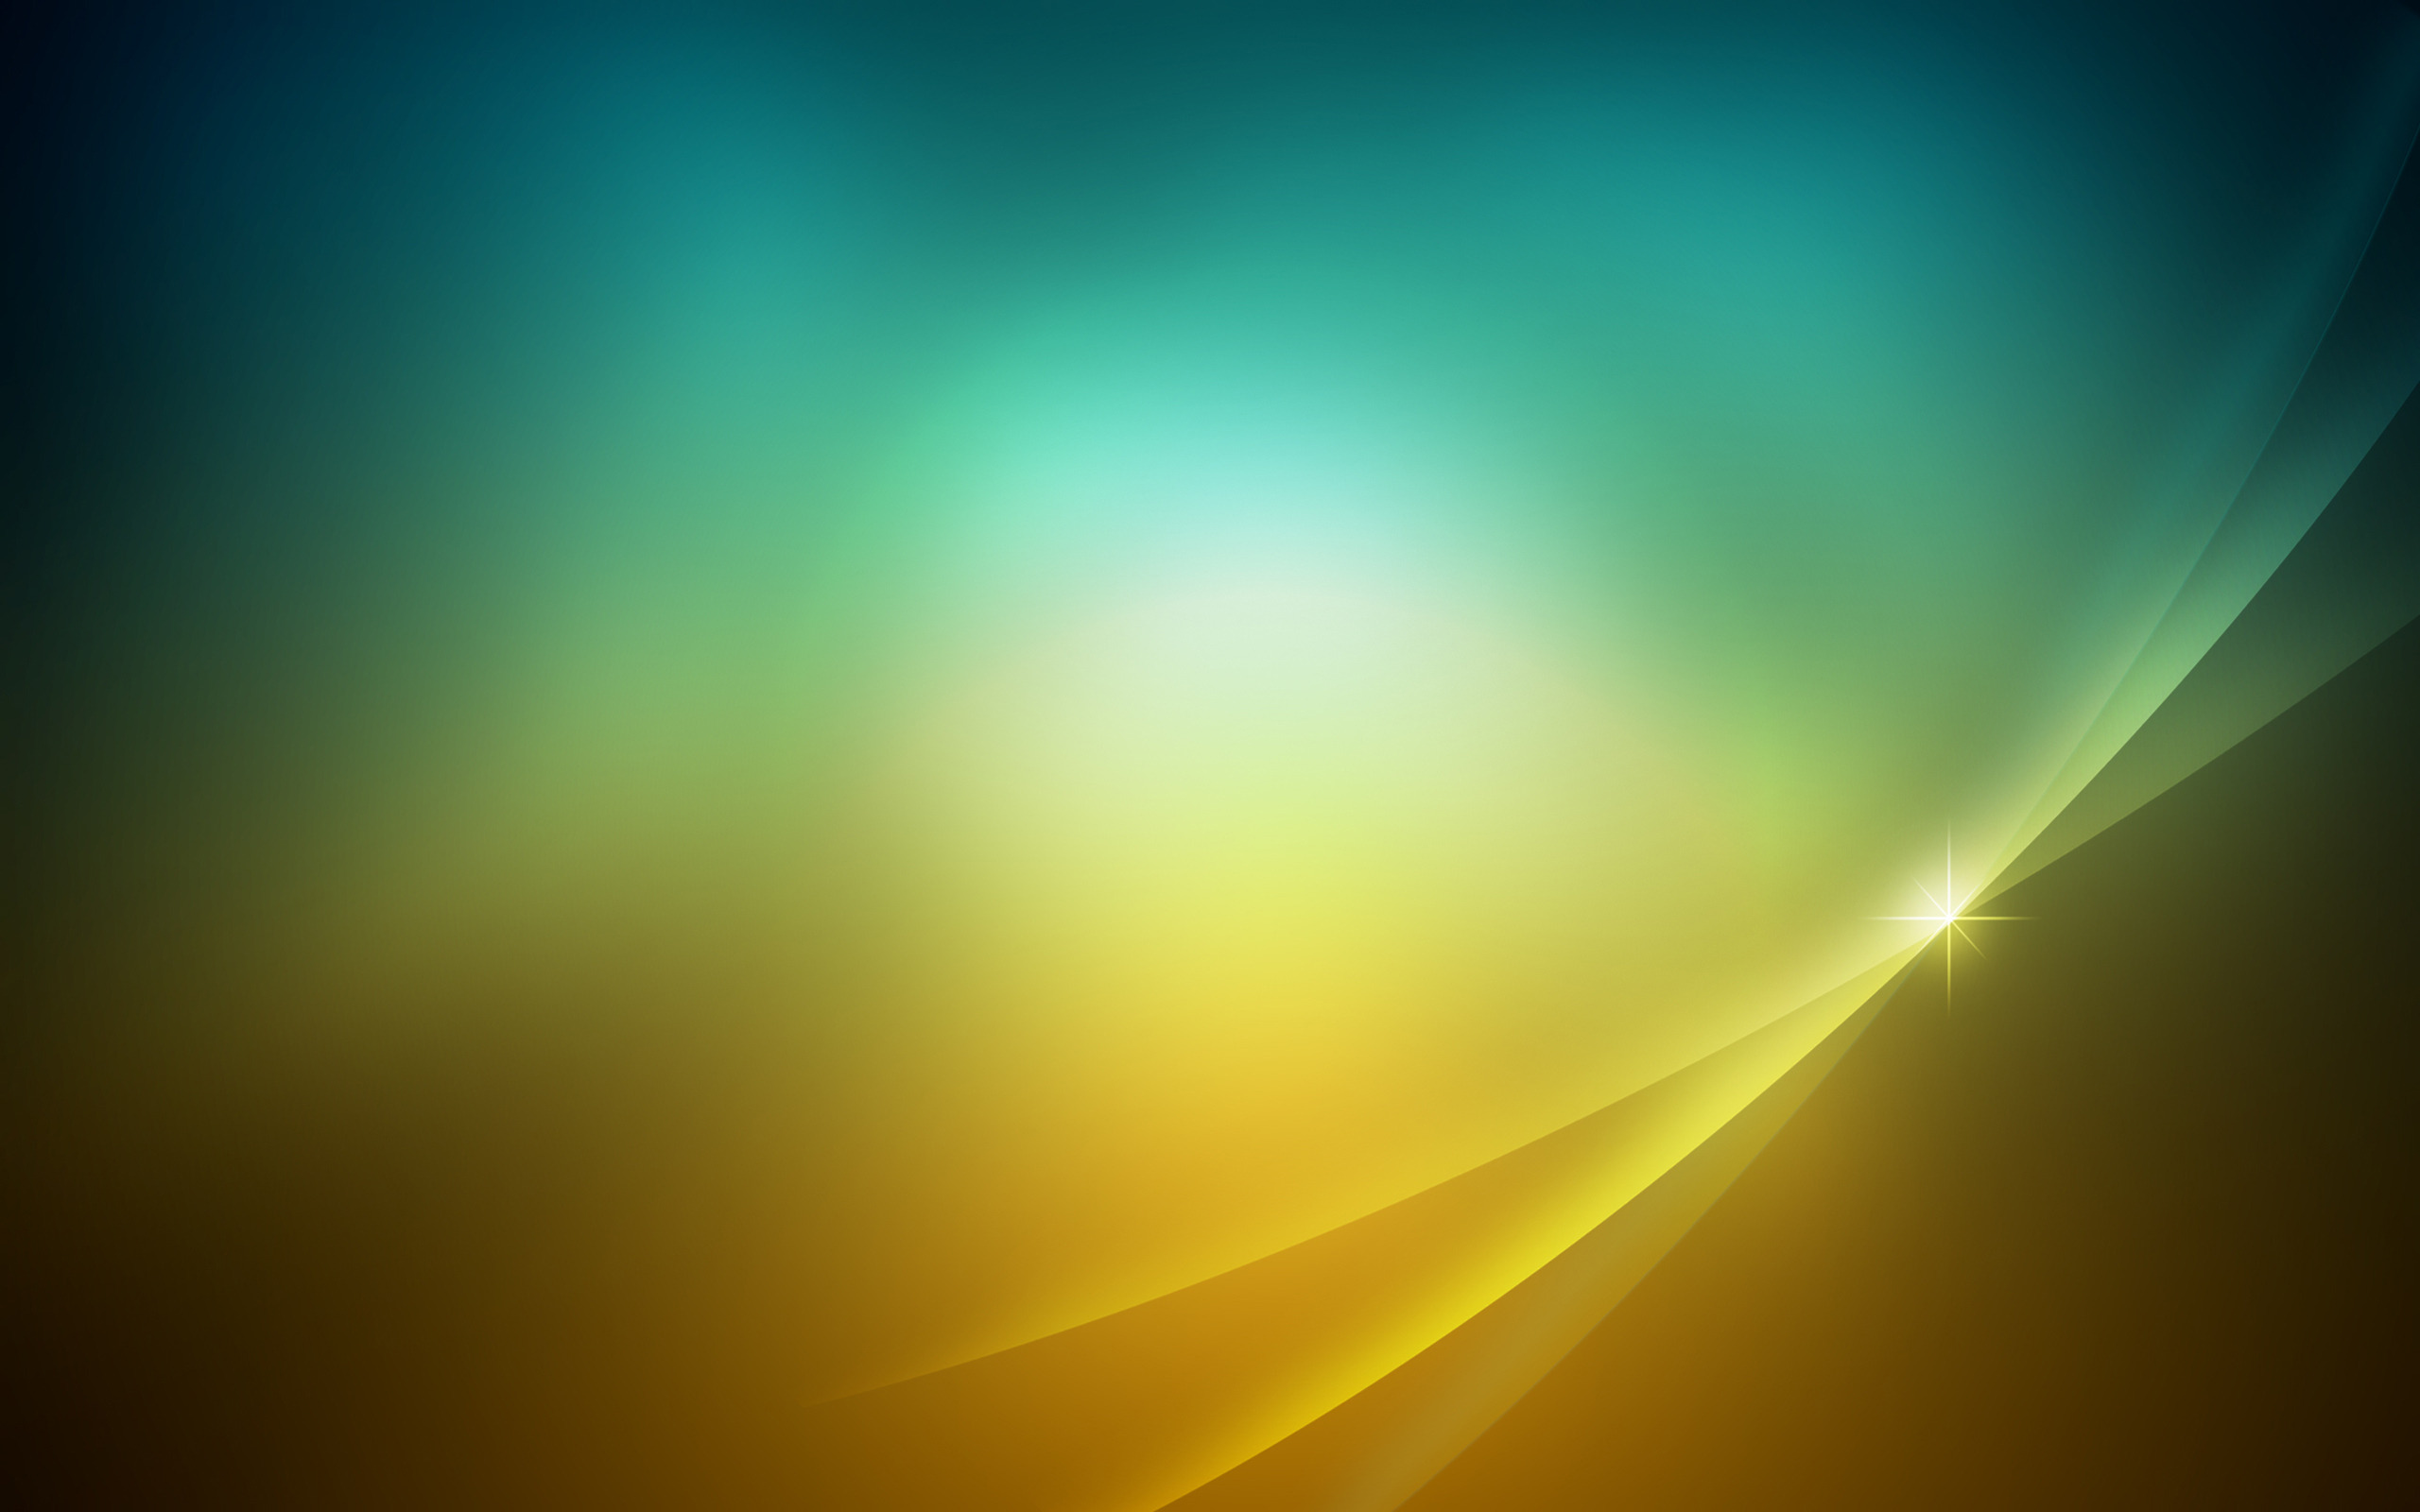  transition yellow screensaver wallpapers pictures free download